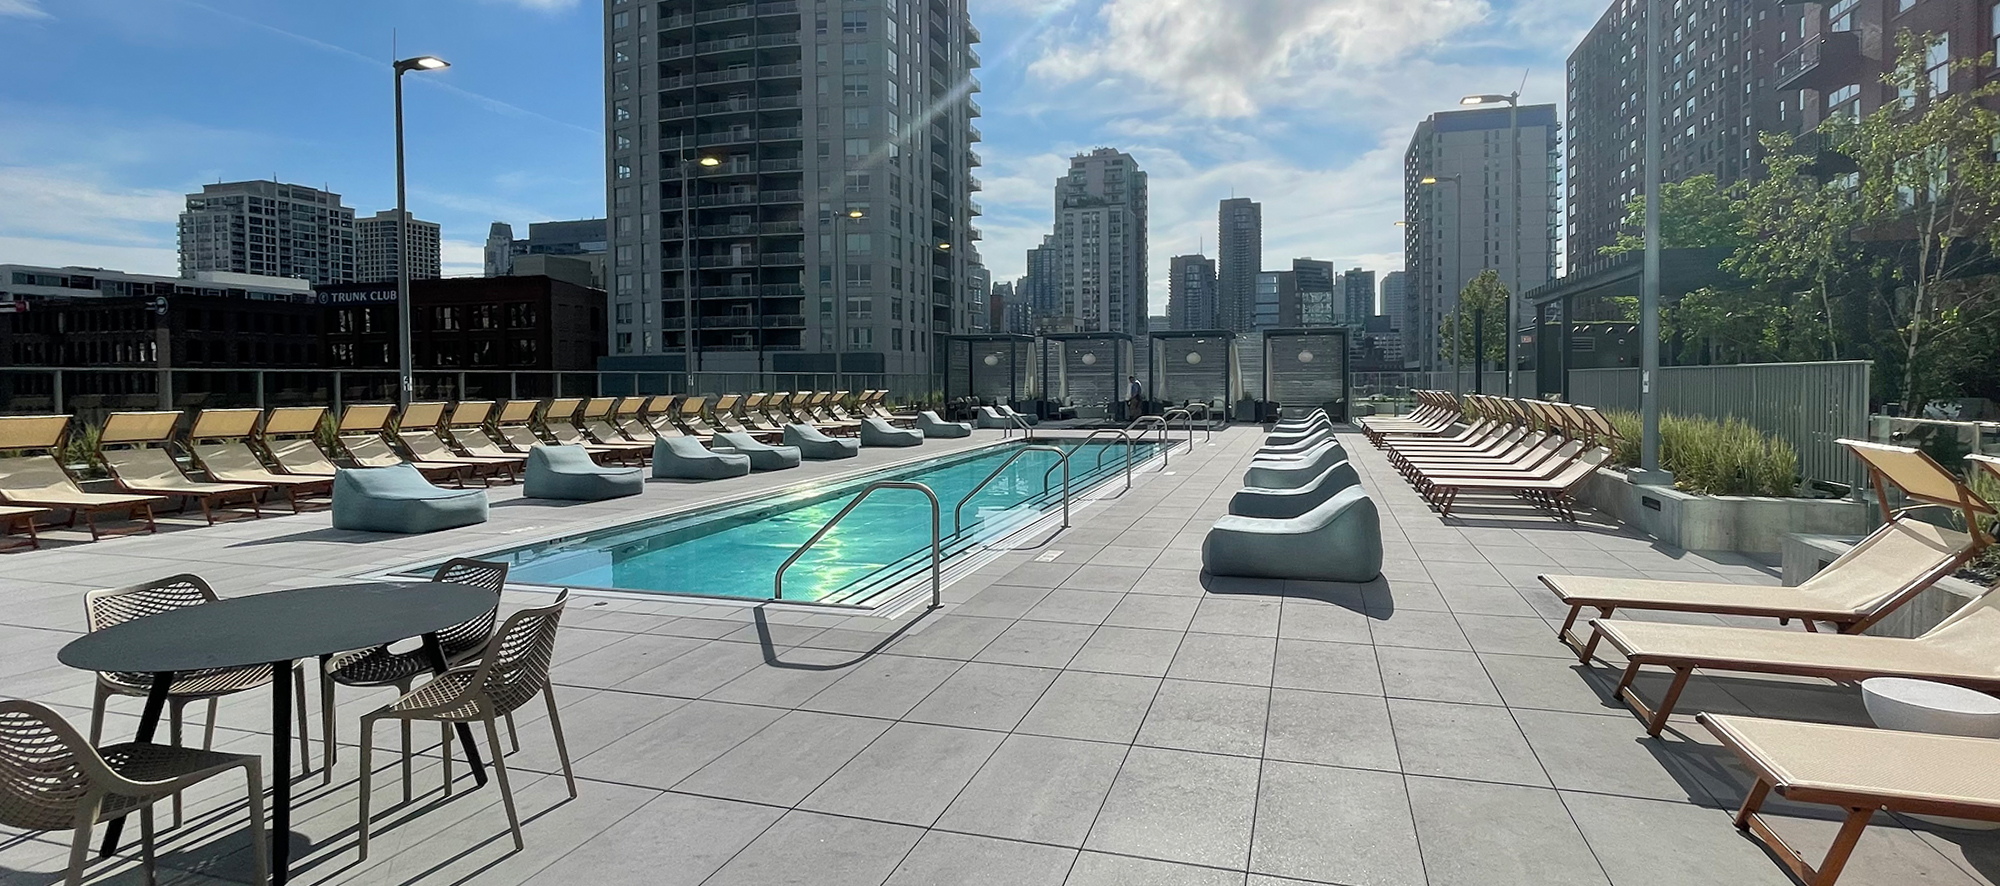 A view of the 369 W Grand pool deck featuring the Chicago skyline and paved with Unilock Beacon Hill Smooth XL in the color opal.